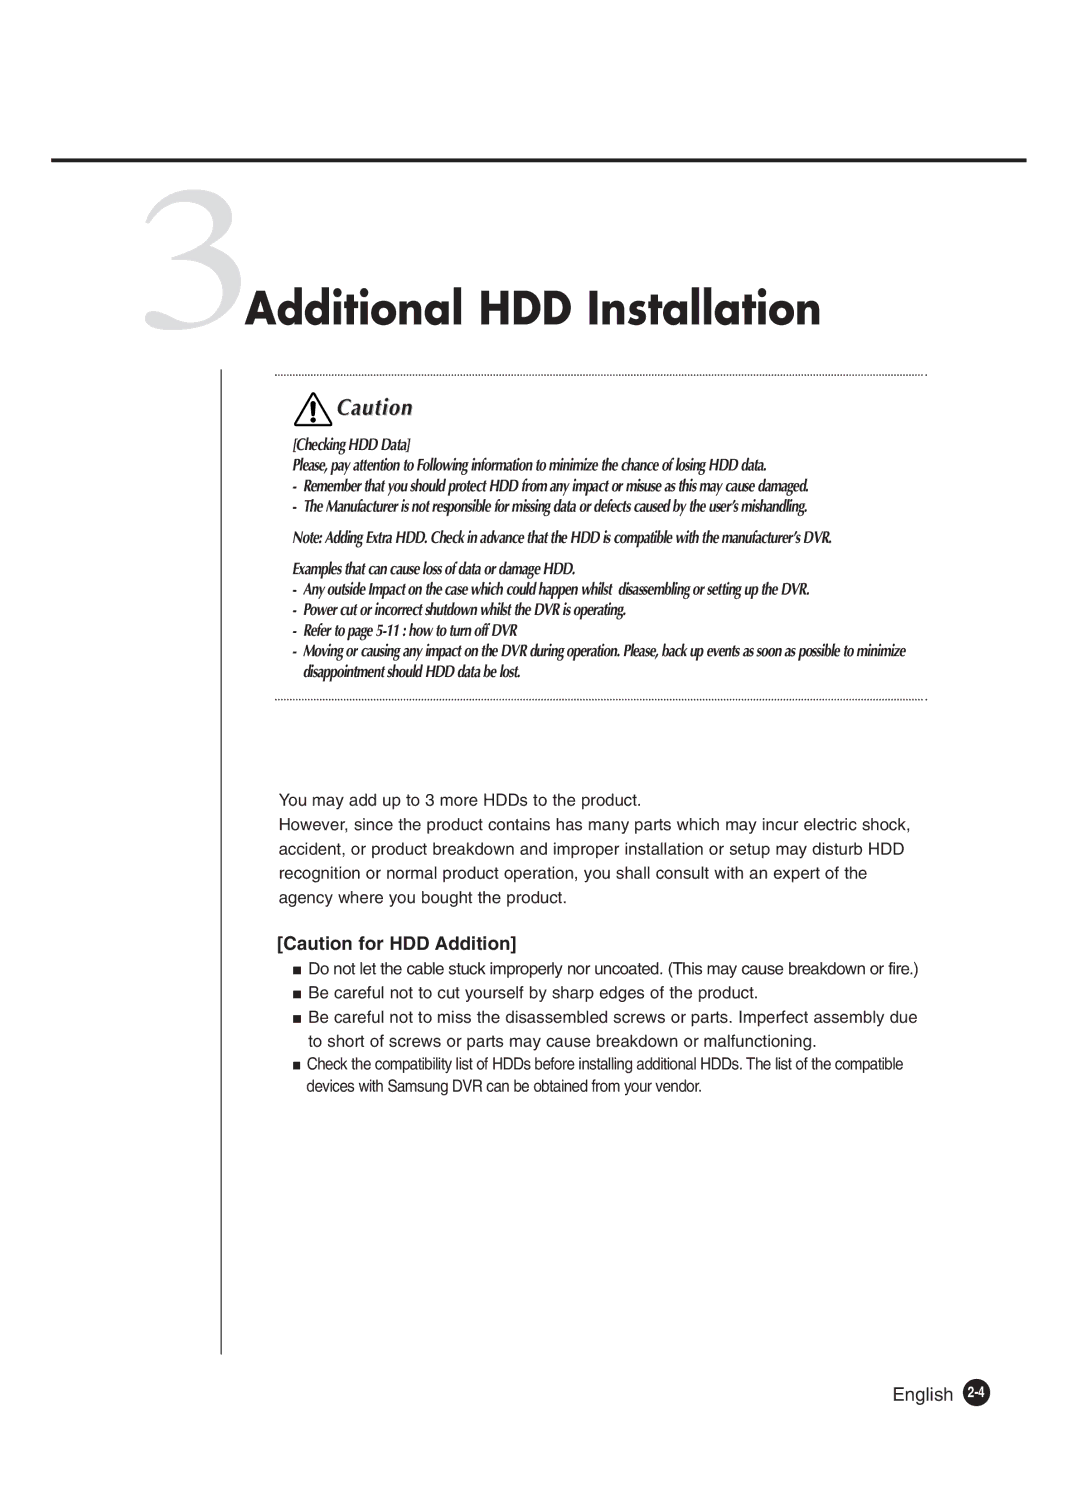 Samsung SHR-4160P manual 3Additional HDD Installation, Examples that can cause loss of data or damage HDD 